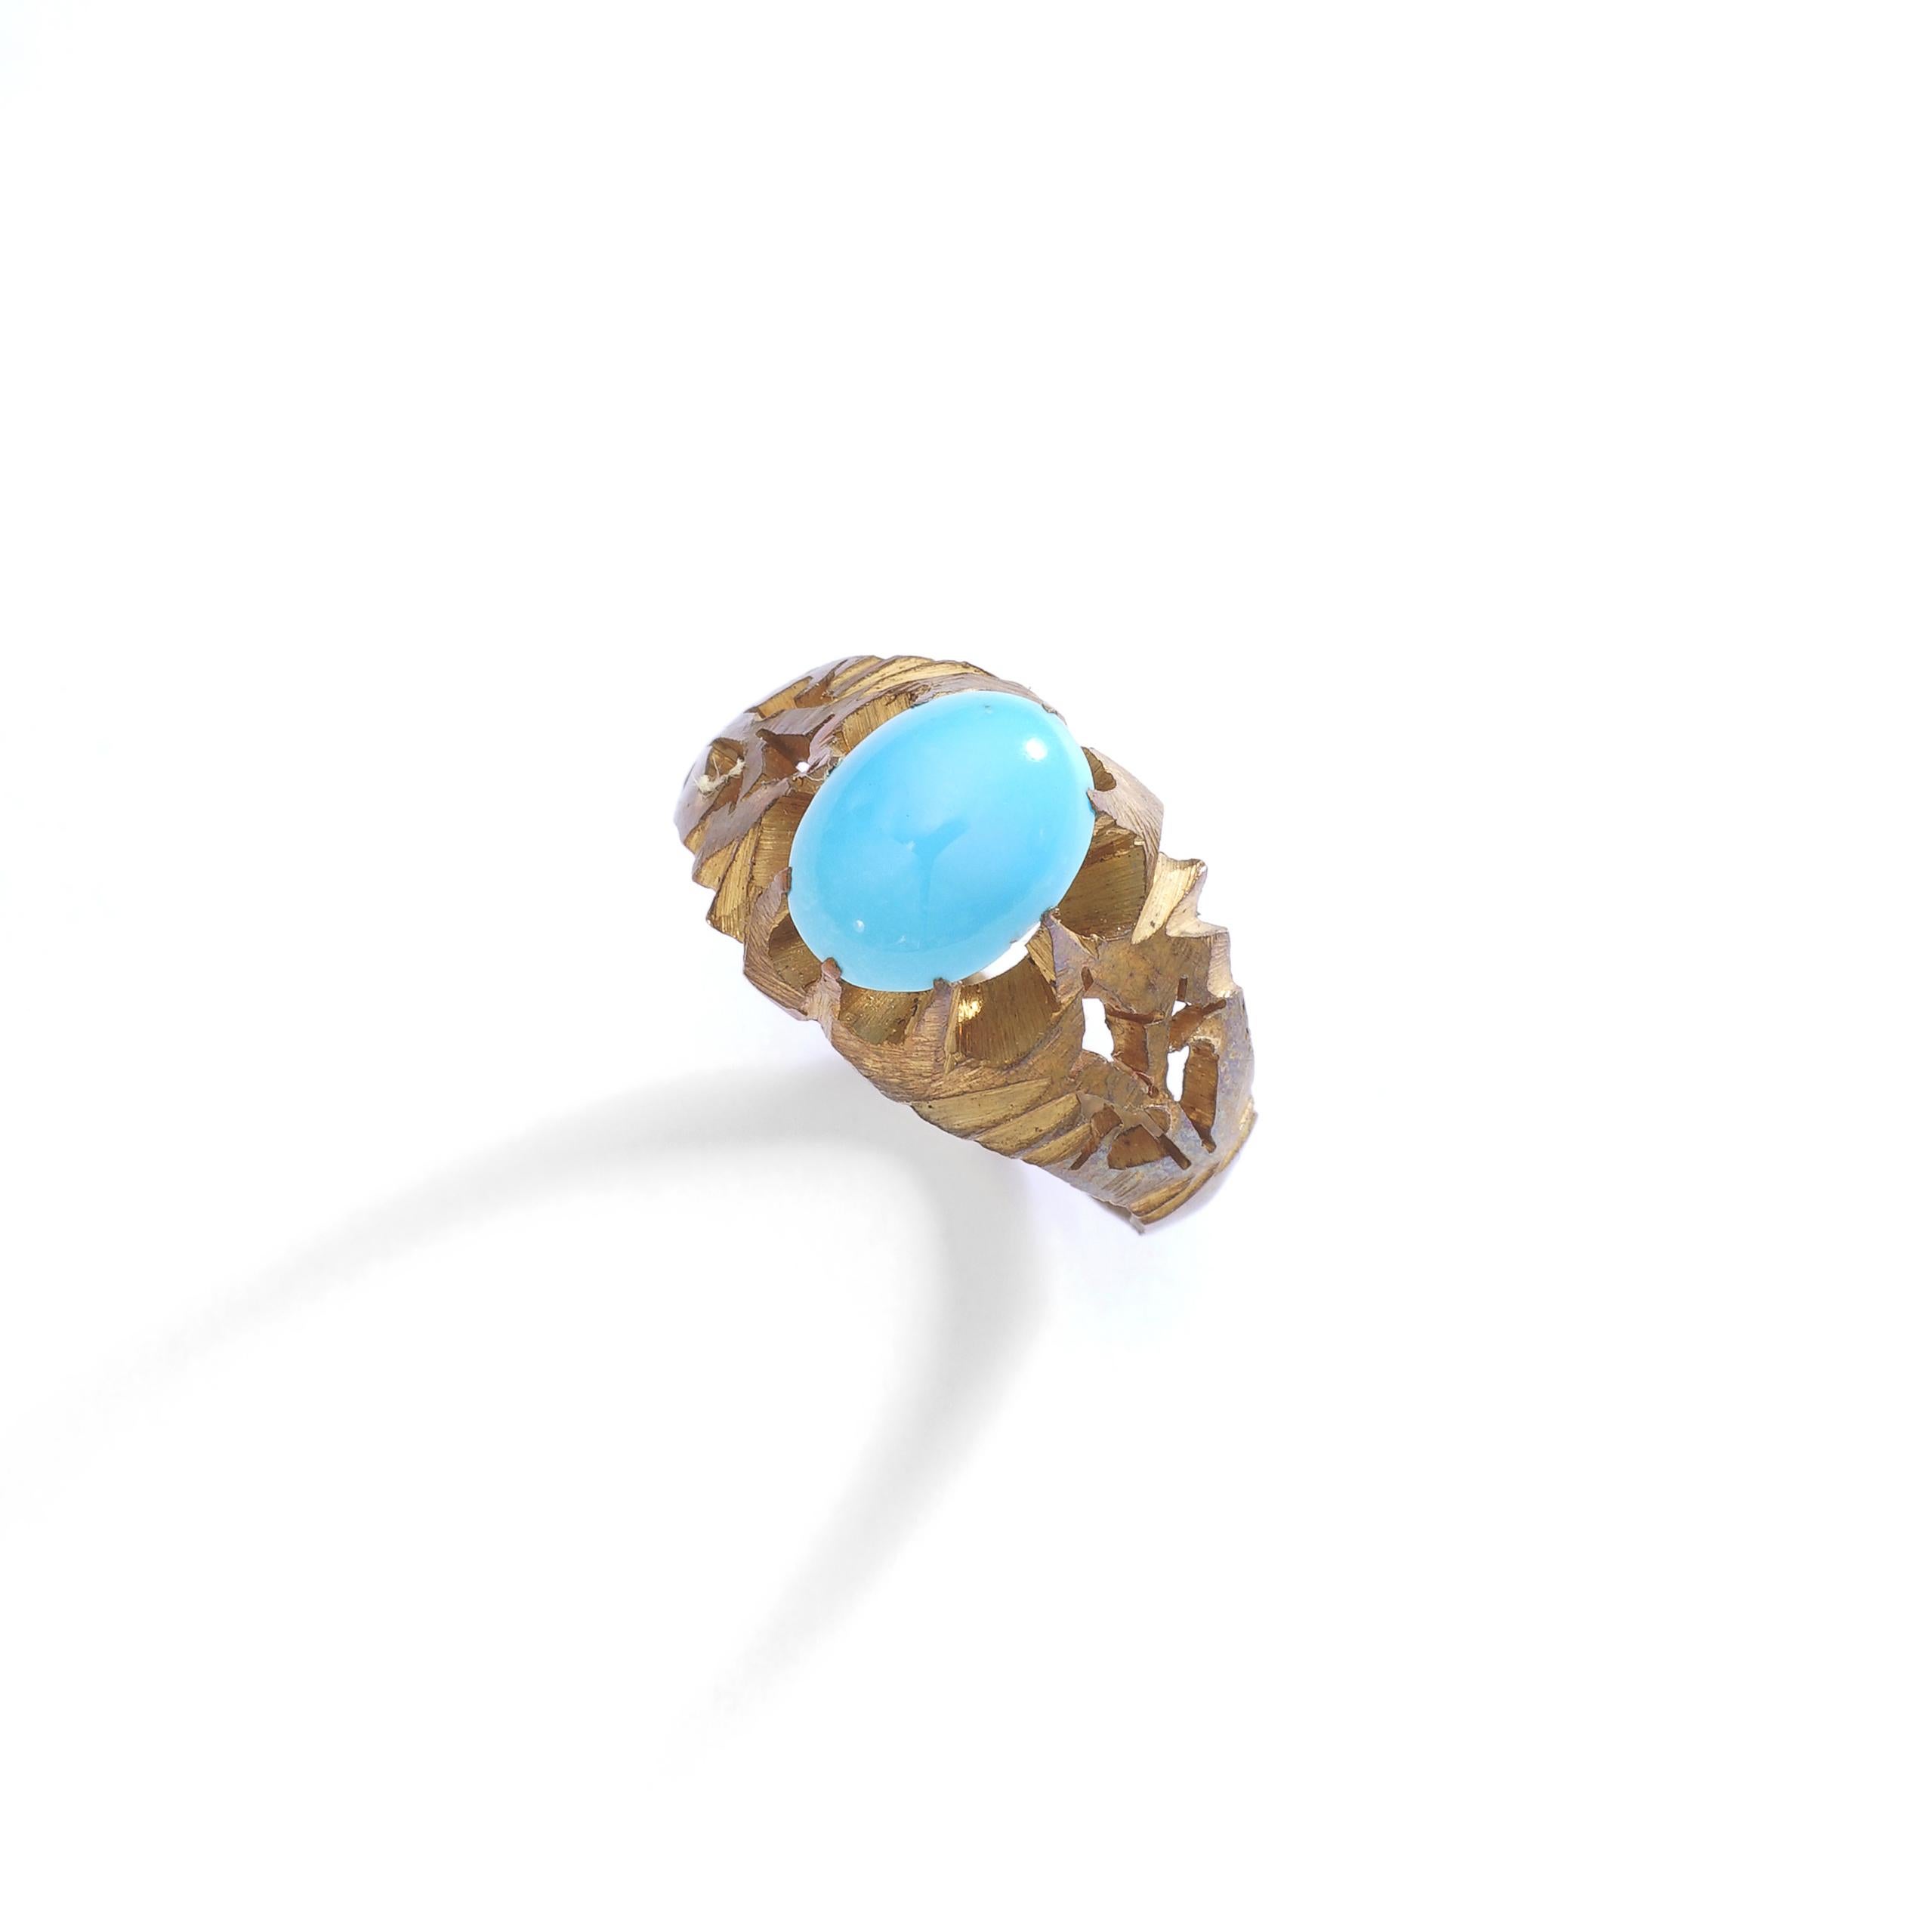 Those Three Natural Turquoise cabochon are each one mounted on brass engraved Art Nouveau rings.

Ring size respectively: 5 1/4, 5 1/4 and 7 US.
